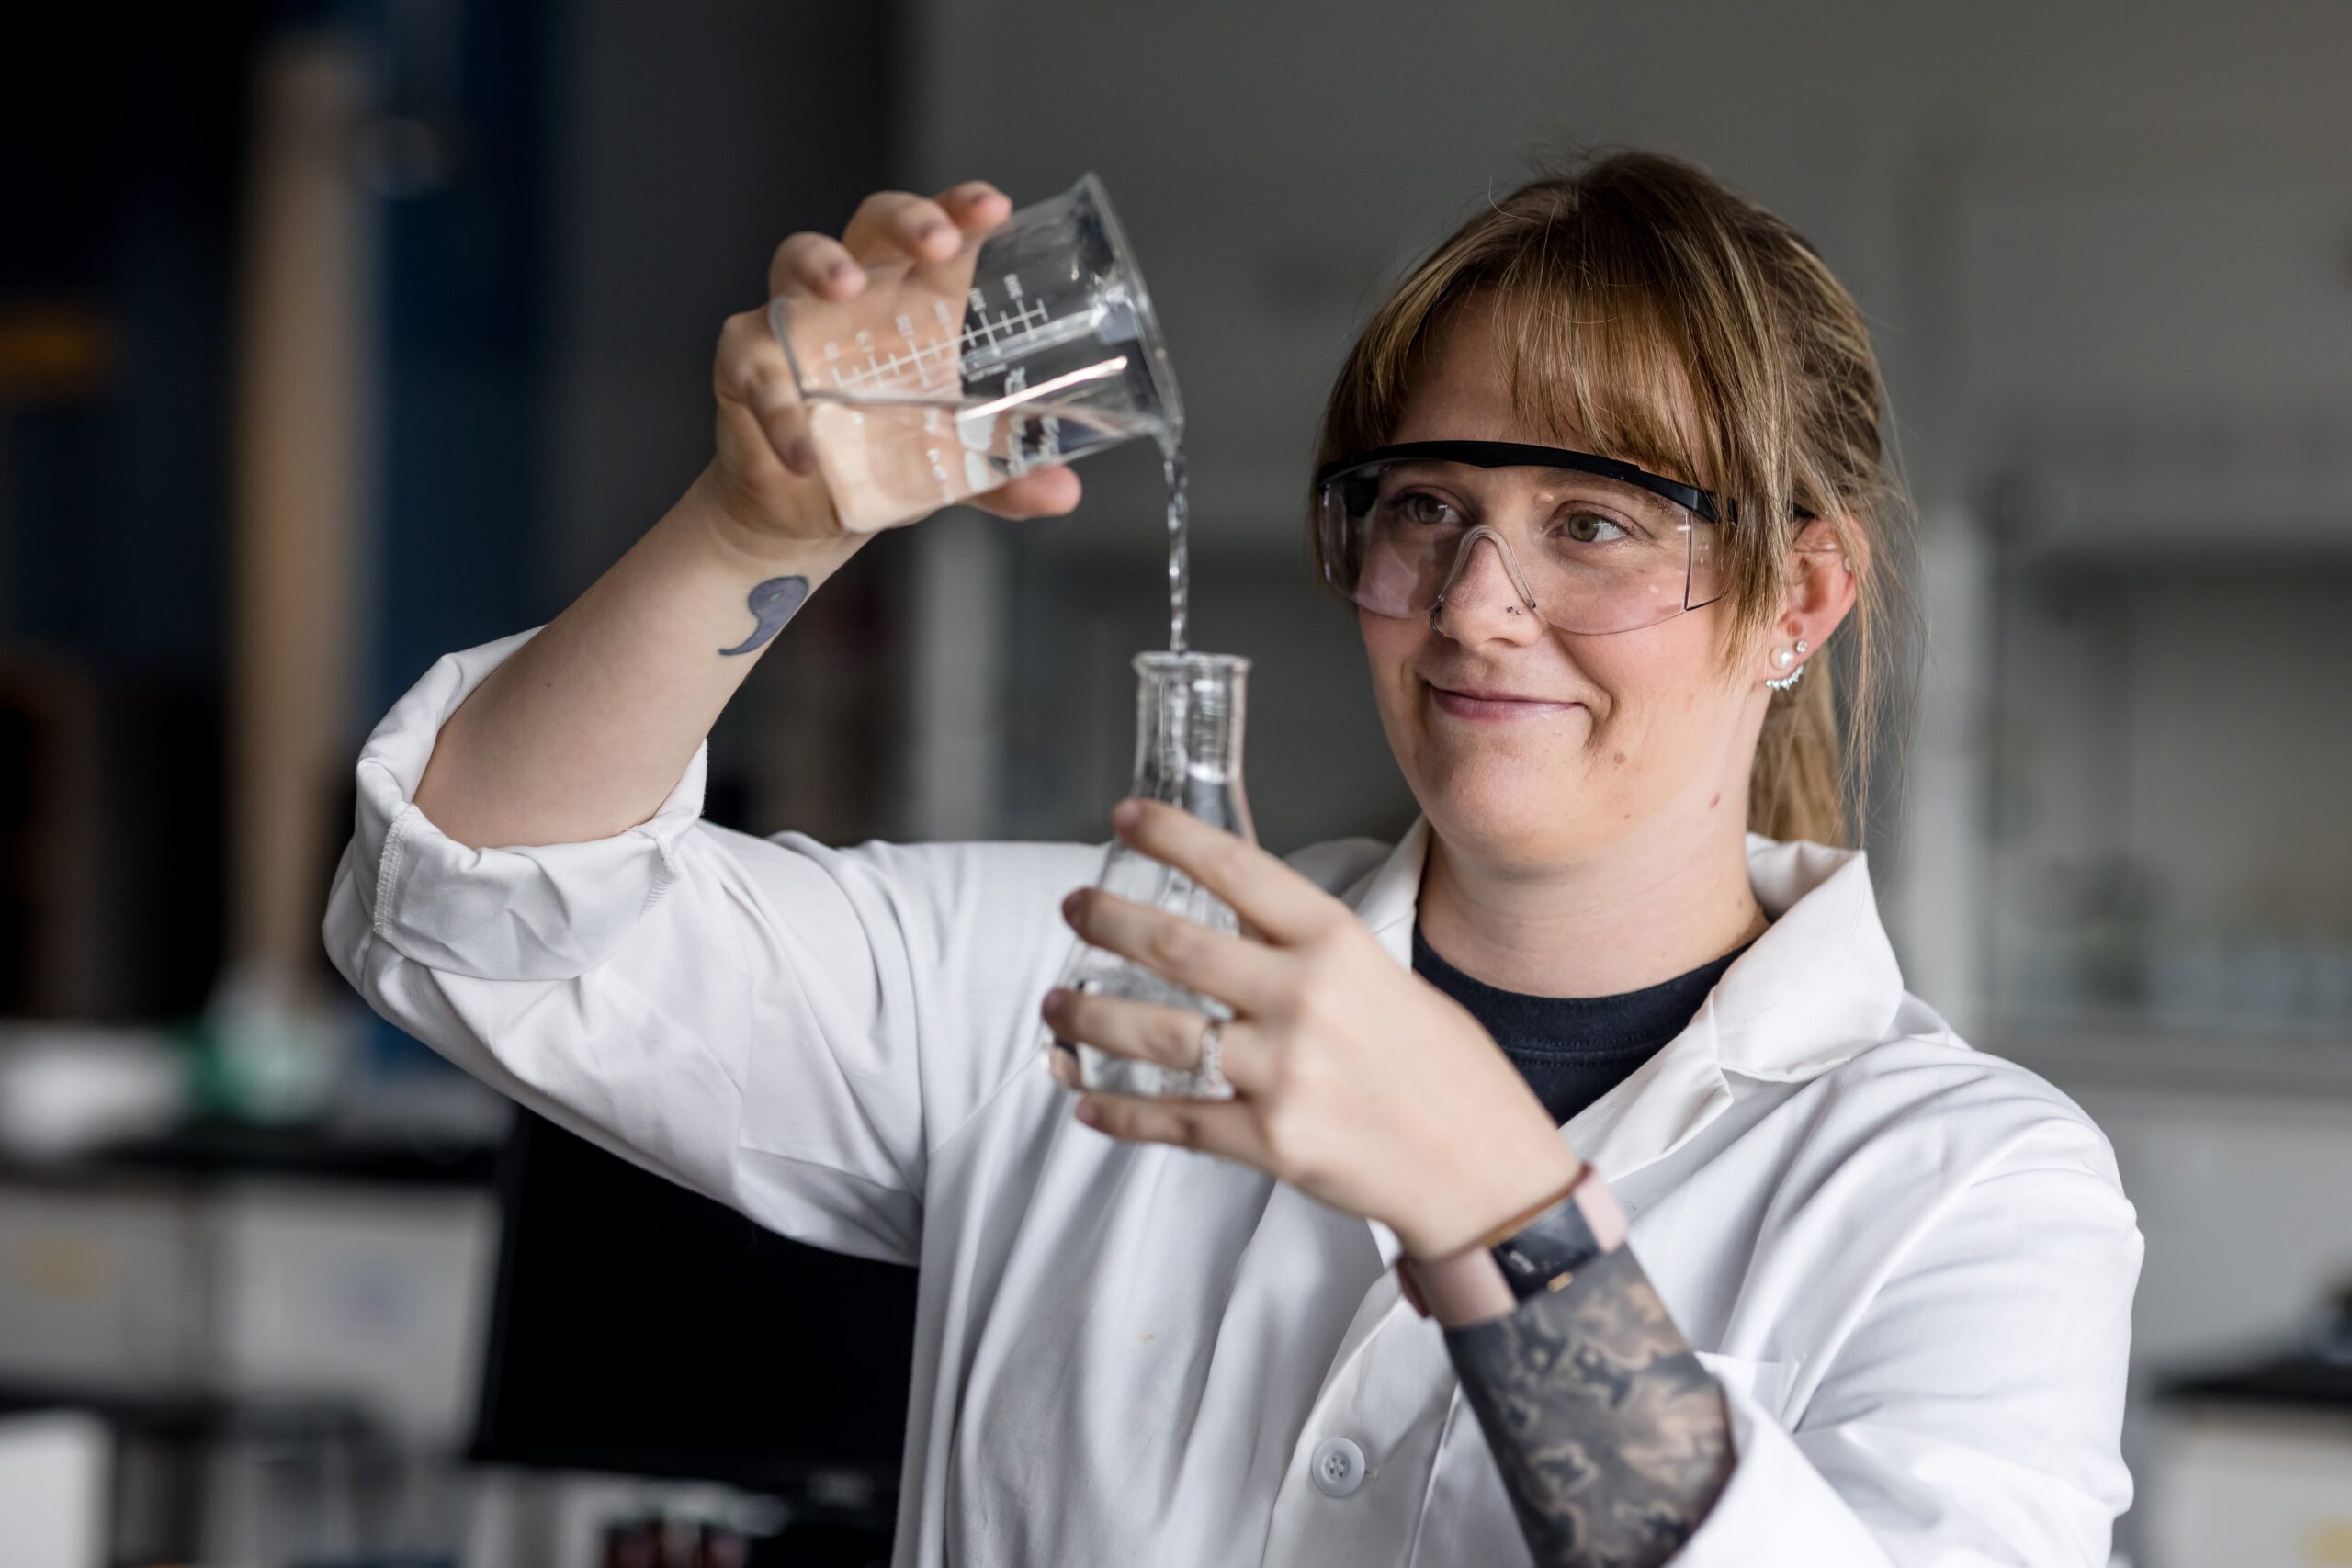 Autumn Gilmore, a chemistry and biochemistry junior at Metropolitan State University, pouring liquid from one beaker into another.